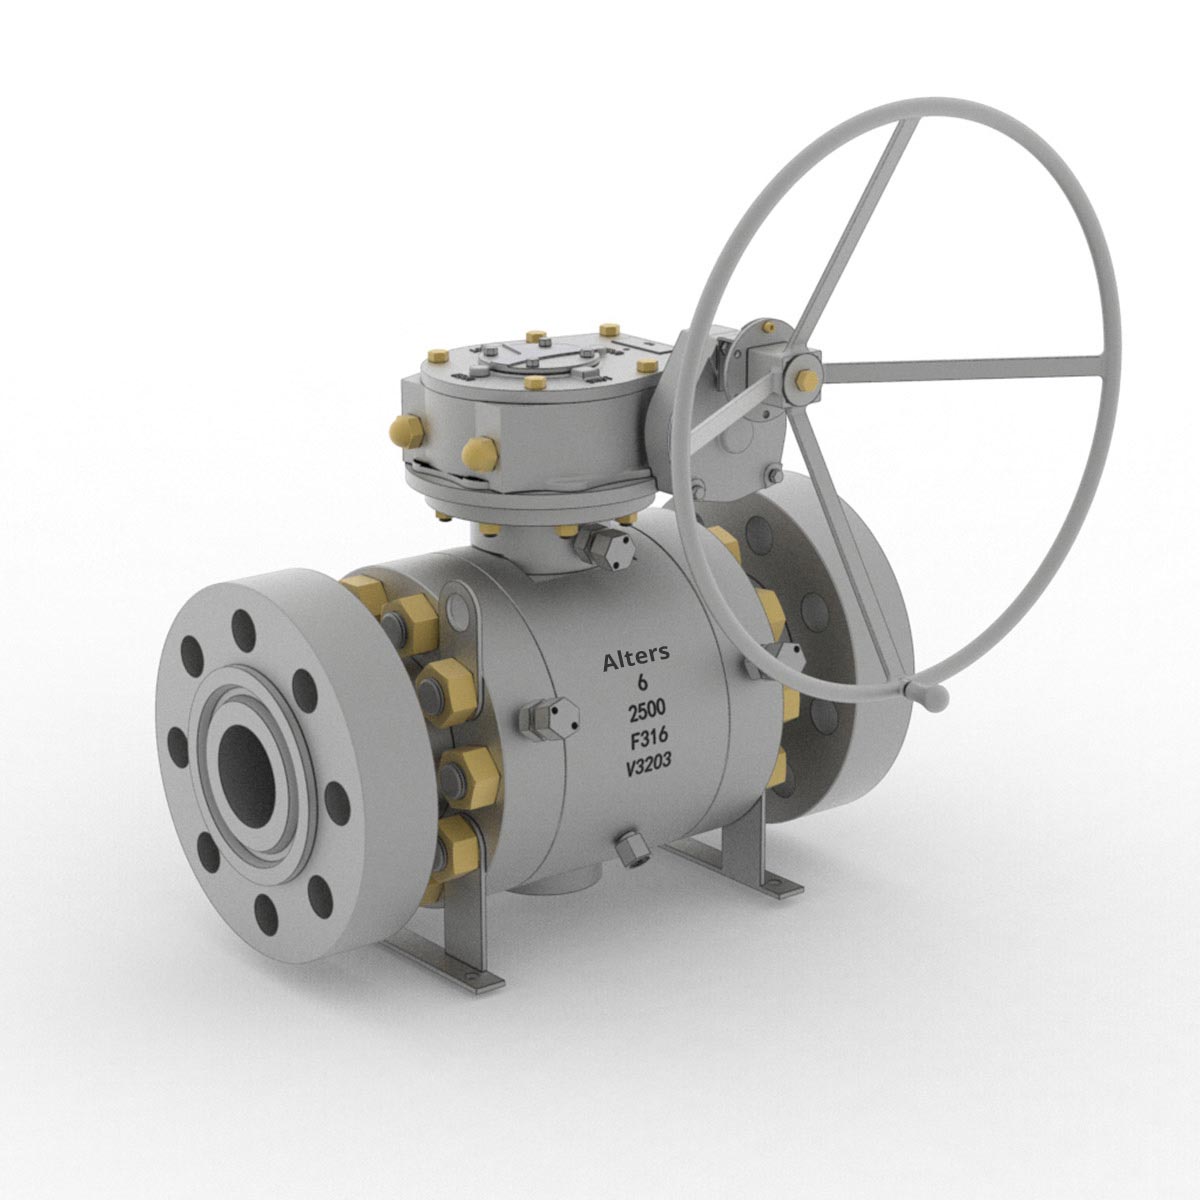 Forged Trunnion Mounted Ball Valve from AlterValve with the company name and specifications.